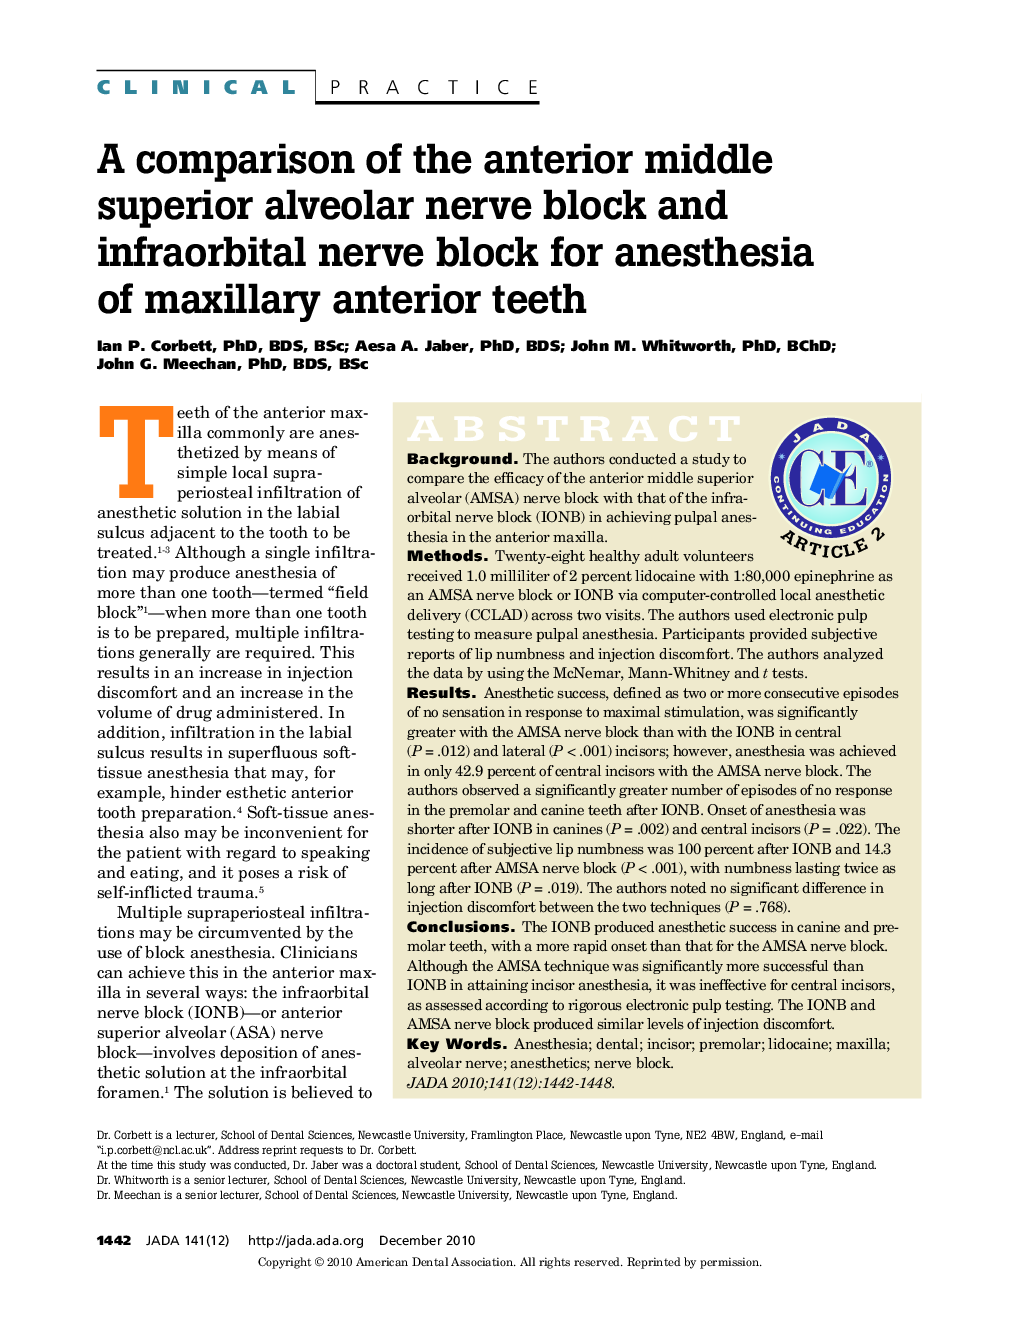 A Comparison of the Anterior Middle Superior Alveolar Nerve Block and Infraorbital Nerve Block for Anesthesia of Maxillary Anterior Teeth